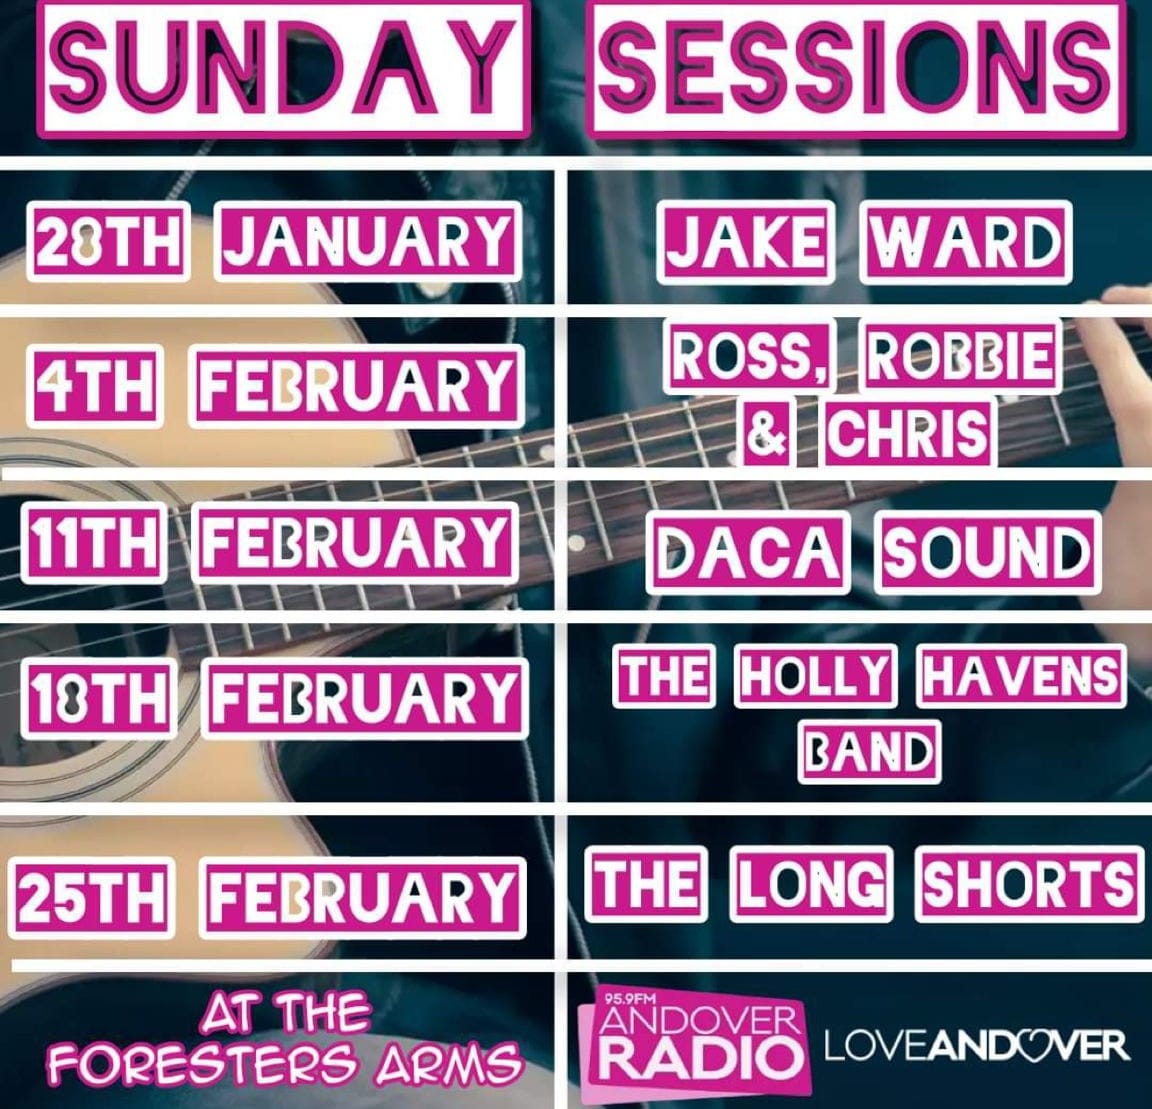 Sunday Sessions: The Holly Havens Band